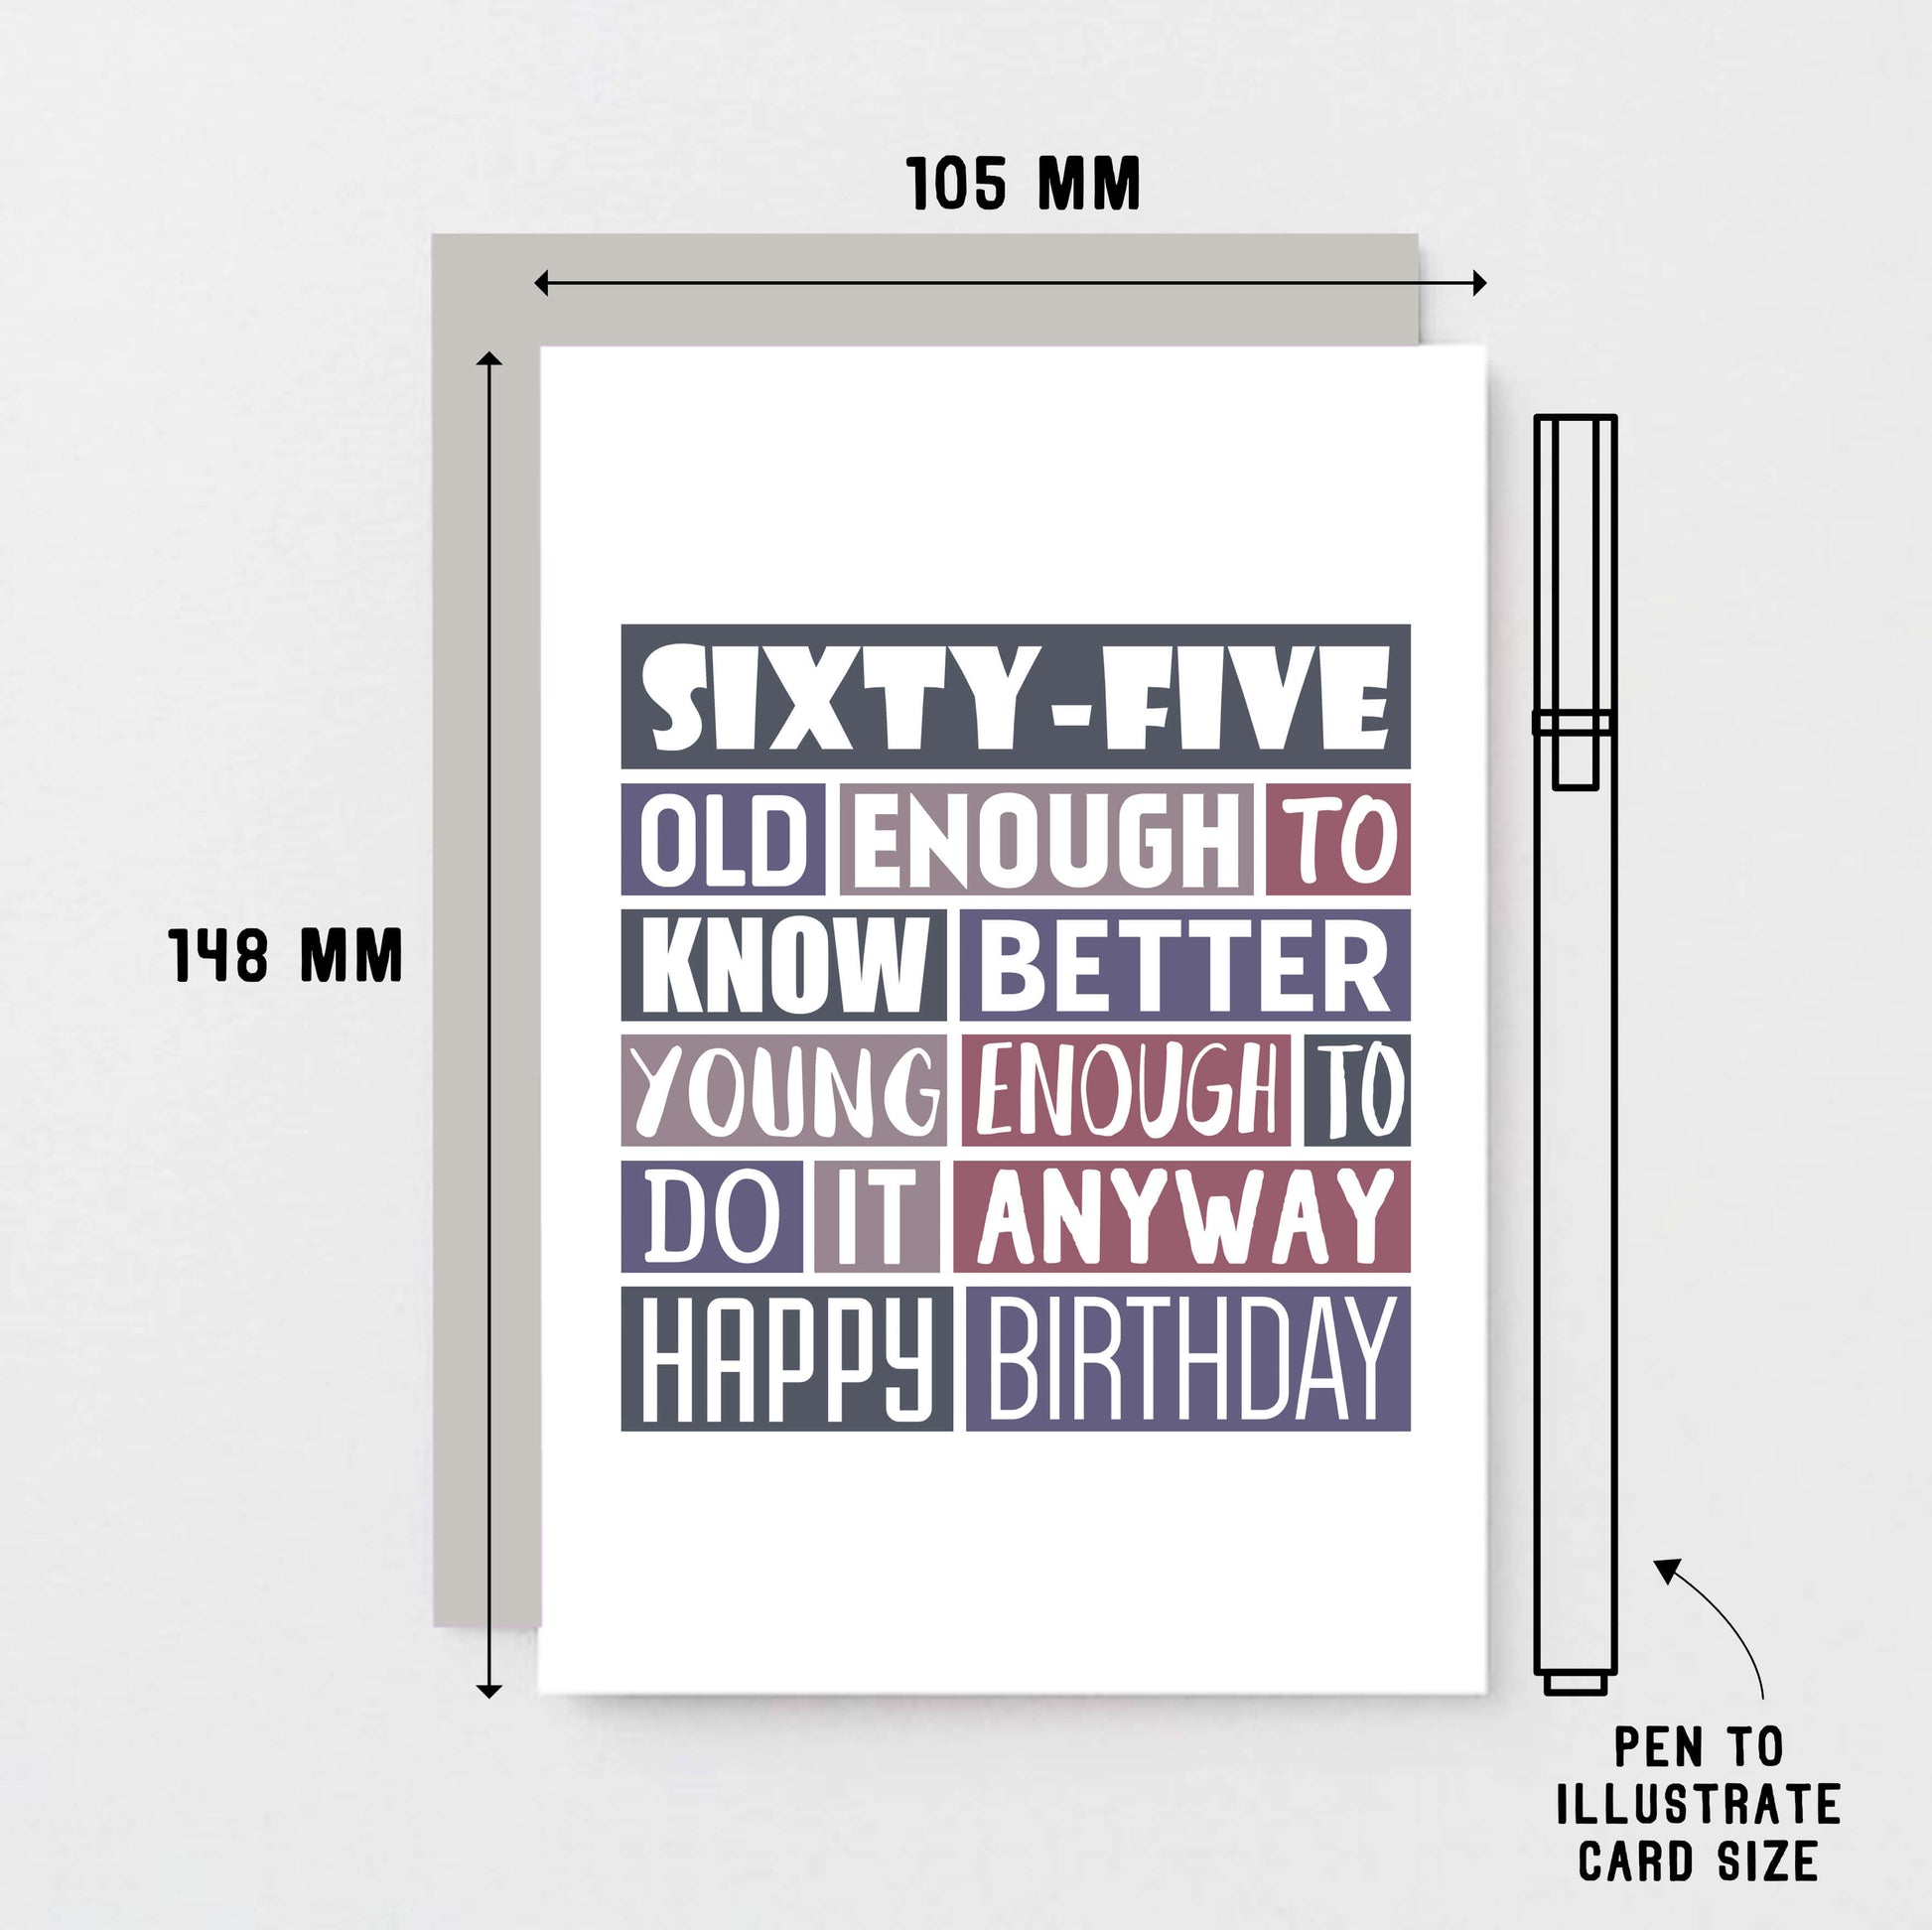 65th Birthday Card by SixElevenCreations. Reads Sixty-five Old enough to know better Young enough to do it anyway Happy birthday. Product Code SE0294A6